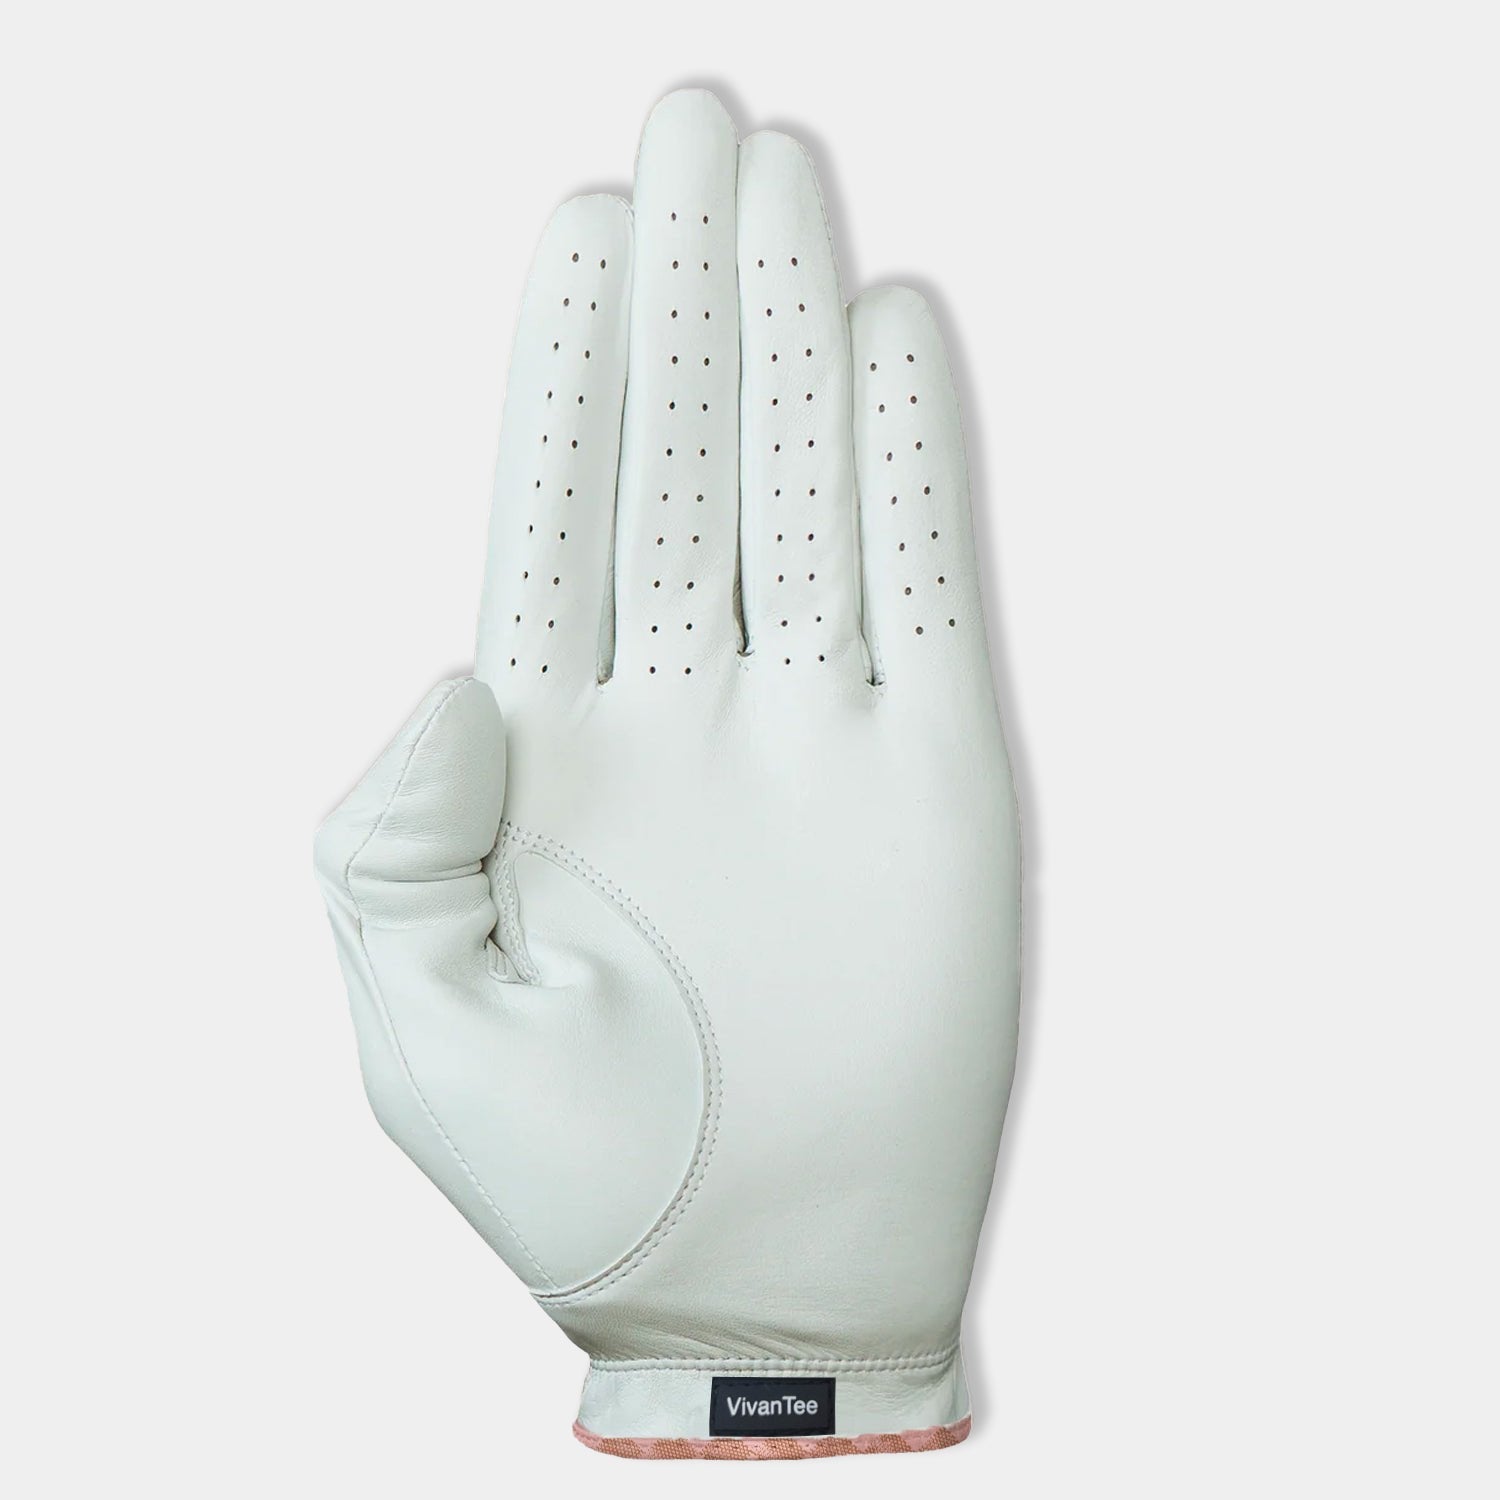 White and pink women's golf glove bottom showing palm and VivanTee logo.